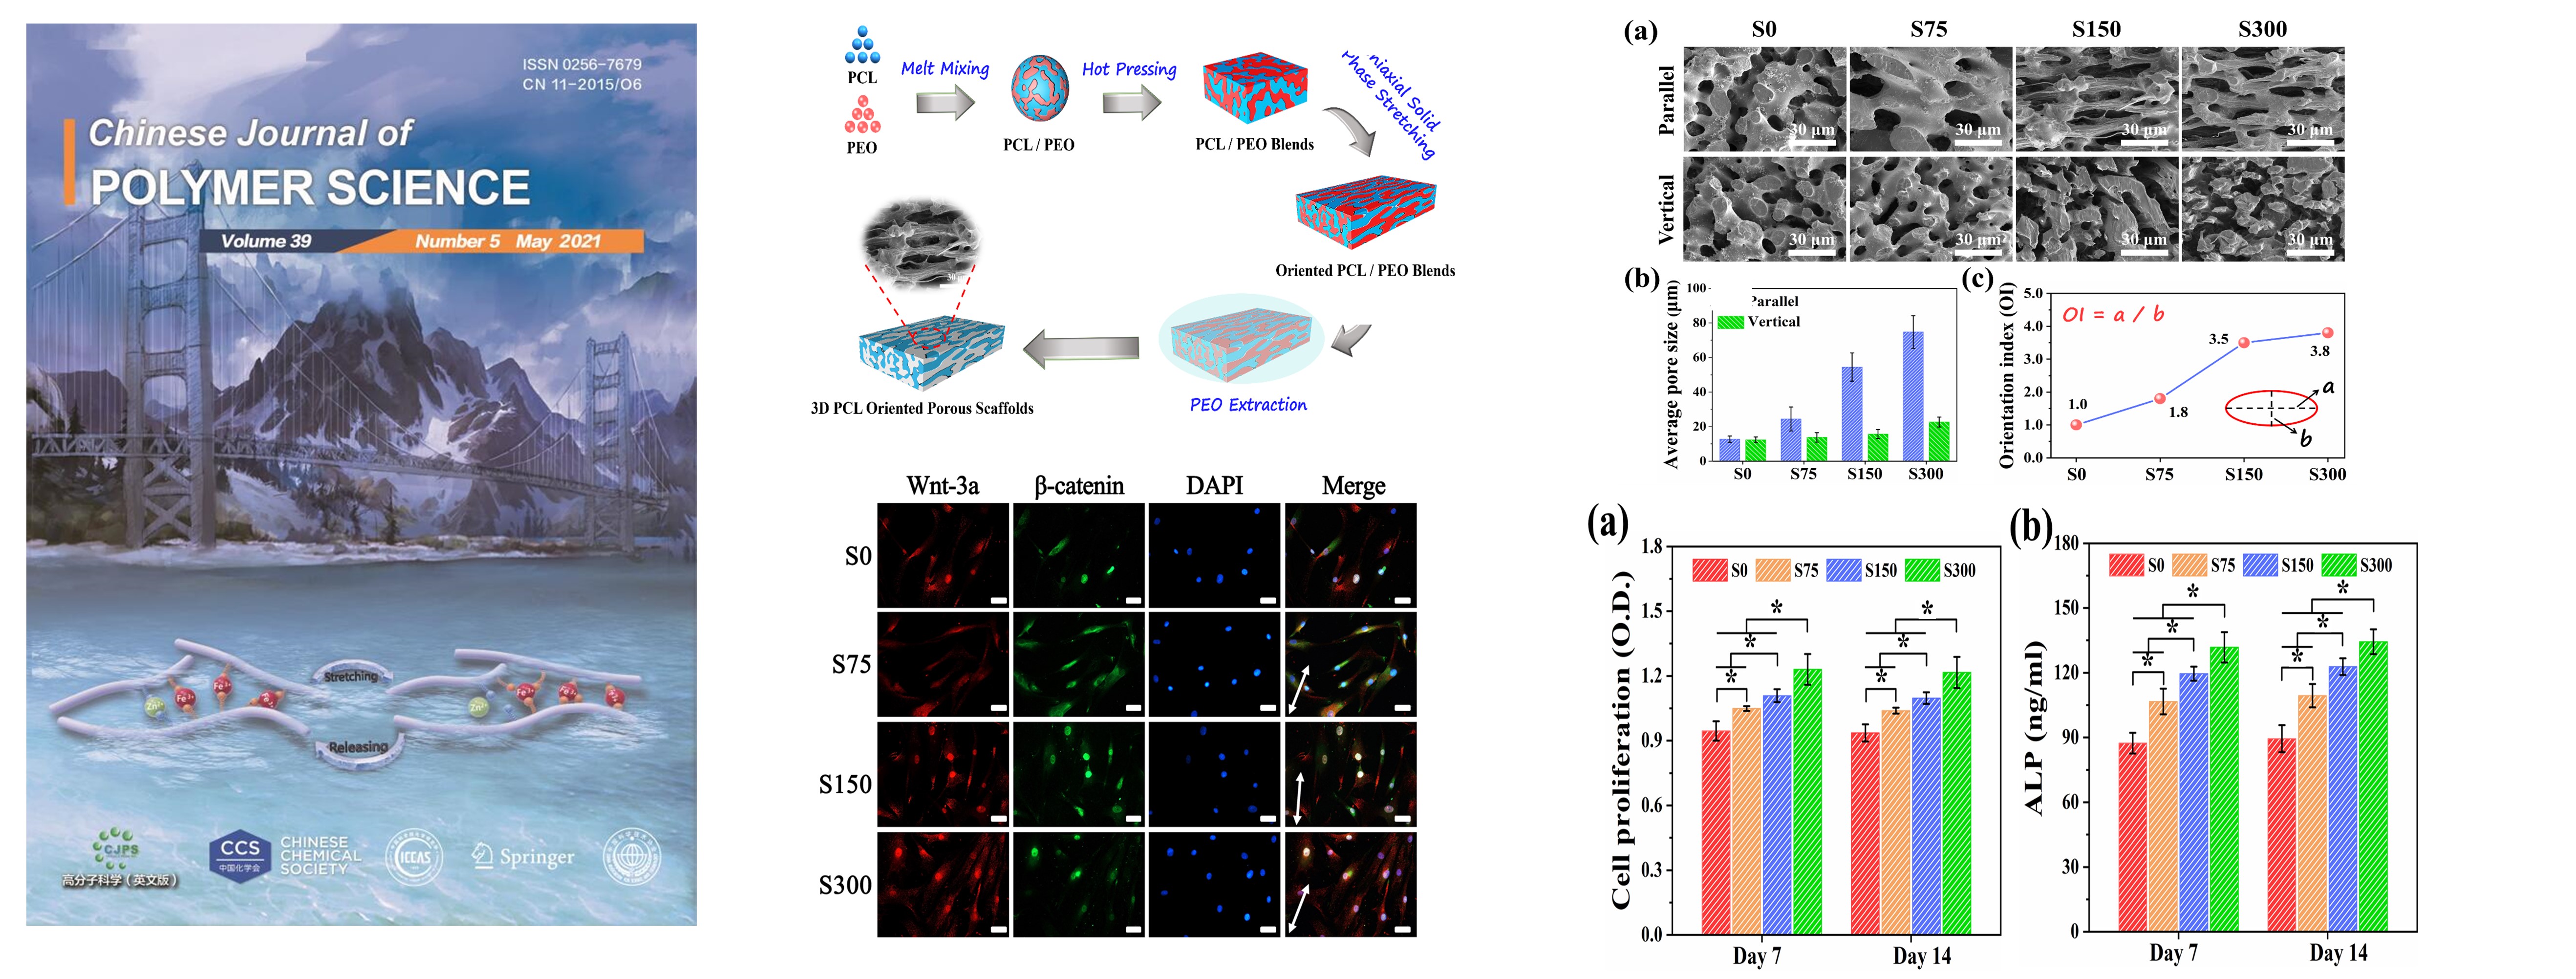 Fabrication of Highly Anisotropic and Interconnected Porous Scaffolds to Promote Preosteoblast Proliferation for Bone Tissue Engineering.